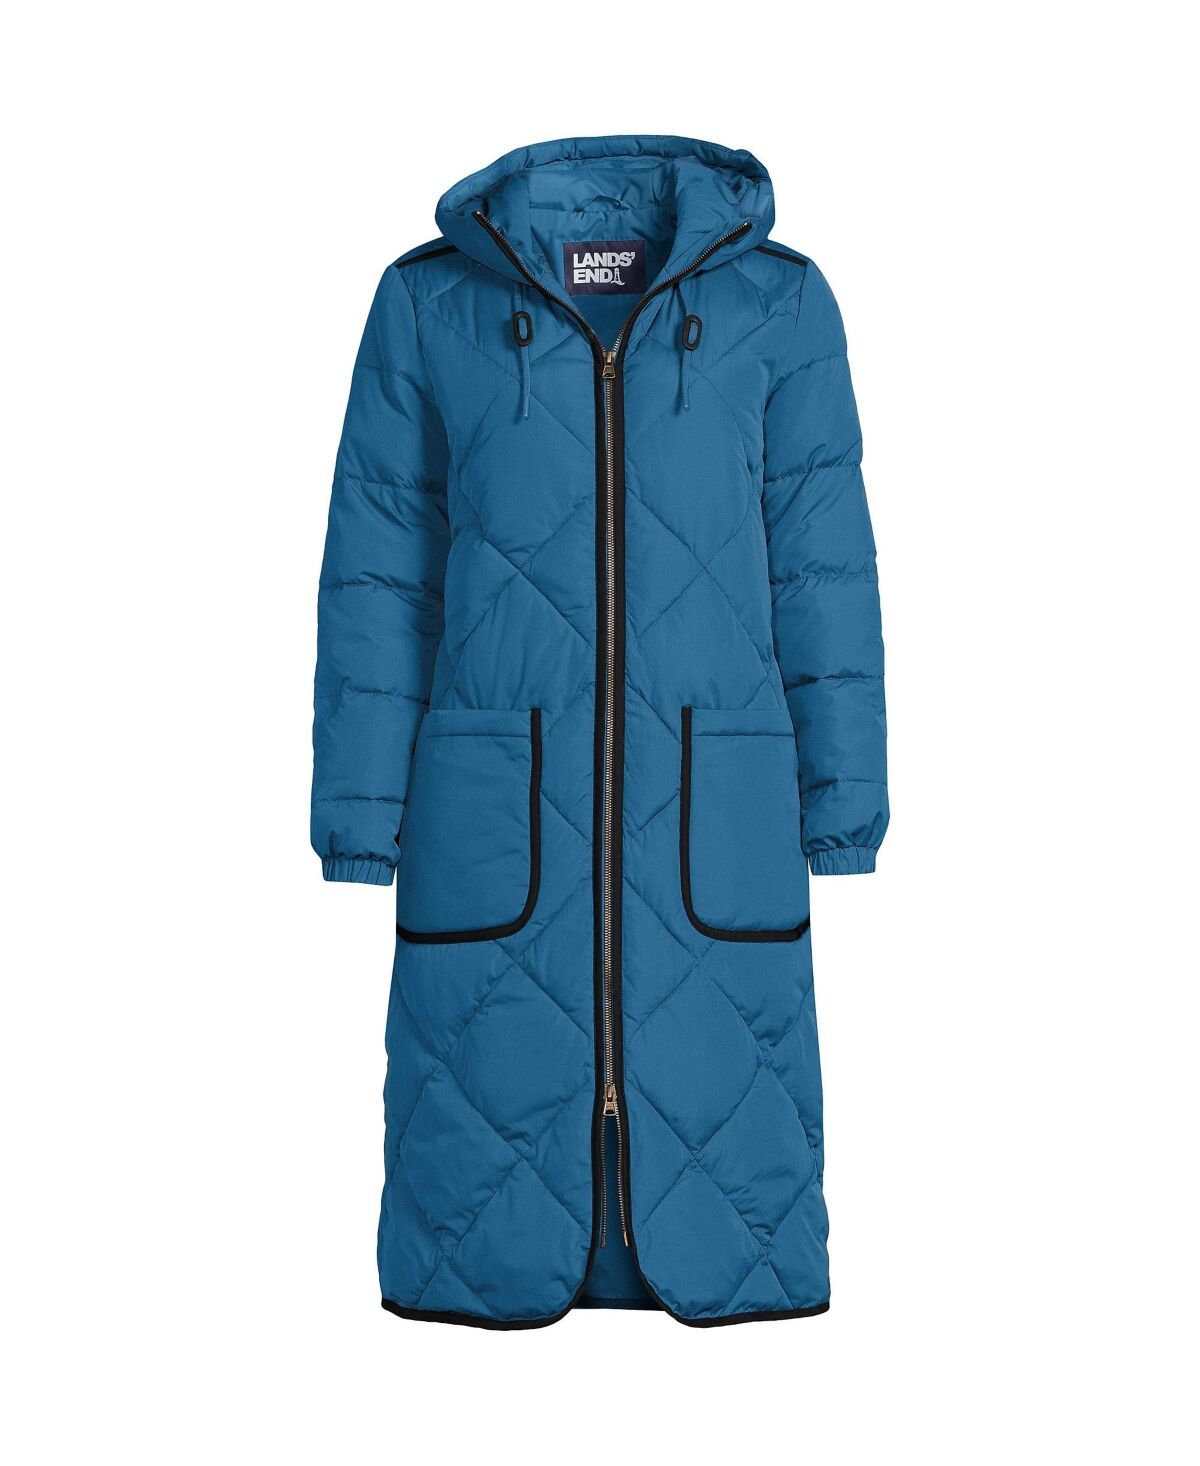 Lands' End Women's Insulated Quilted Primaloft ThermoPlume Maxi Winter Coat - Evening blue